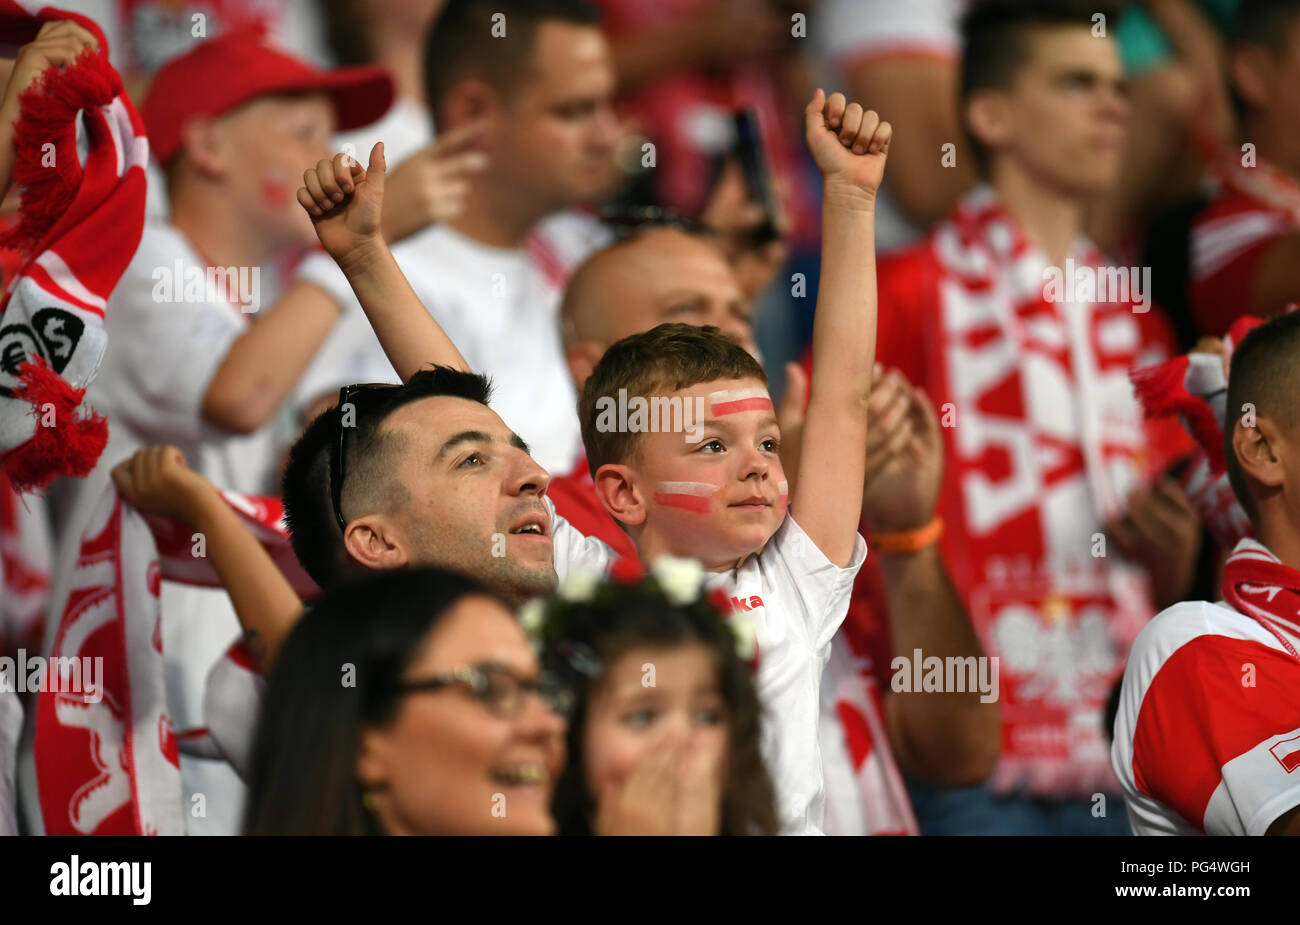 POZNAN, POLAND - MAY 08, 2018: International friendly game between Poland and Chile o/p: Polish fans Stock Photo